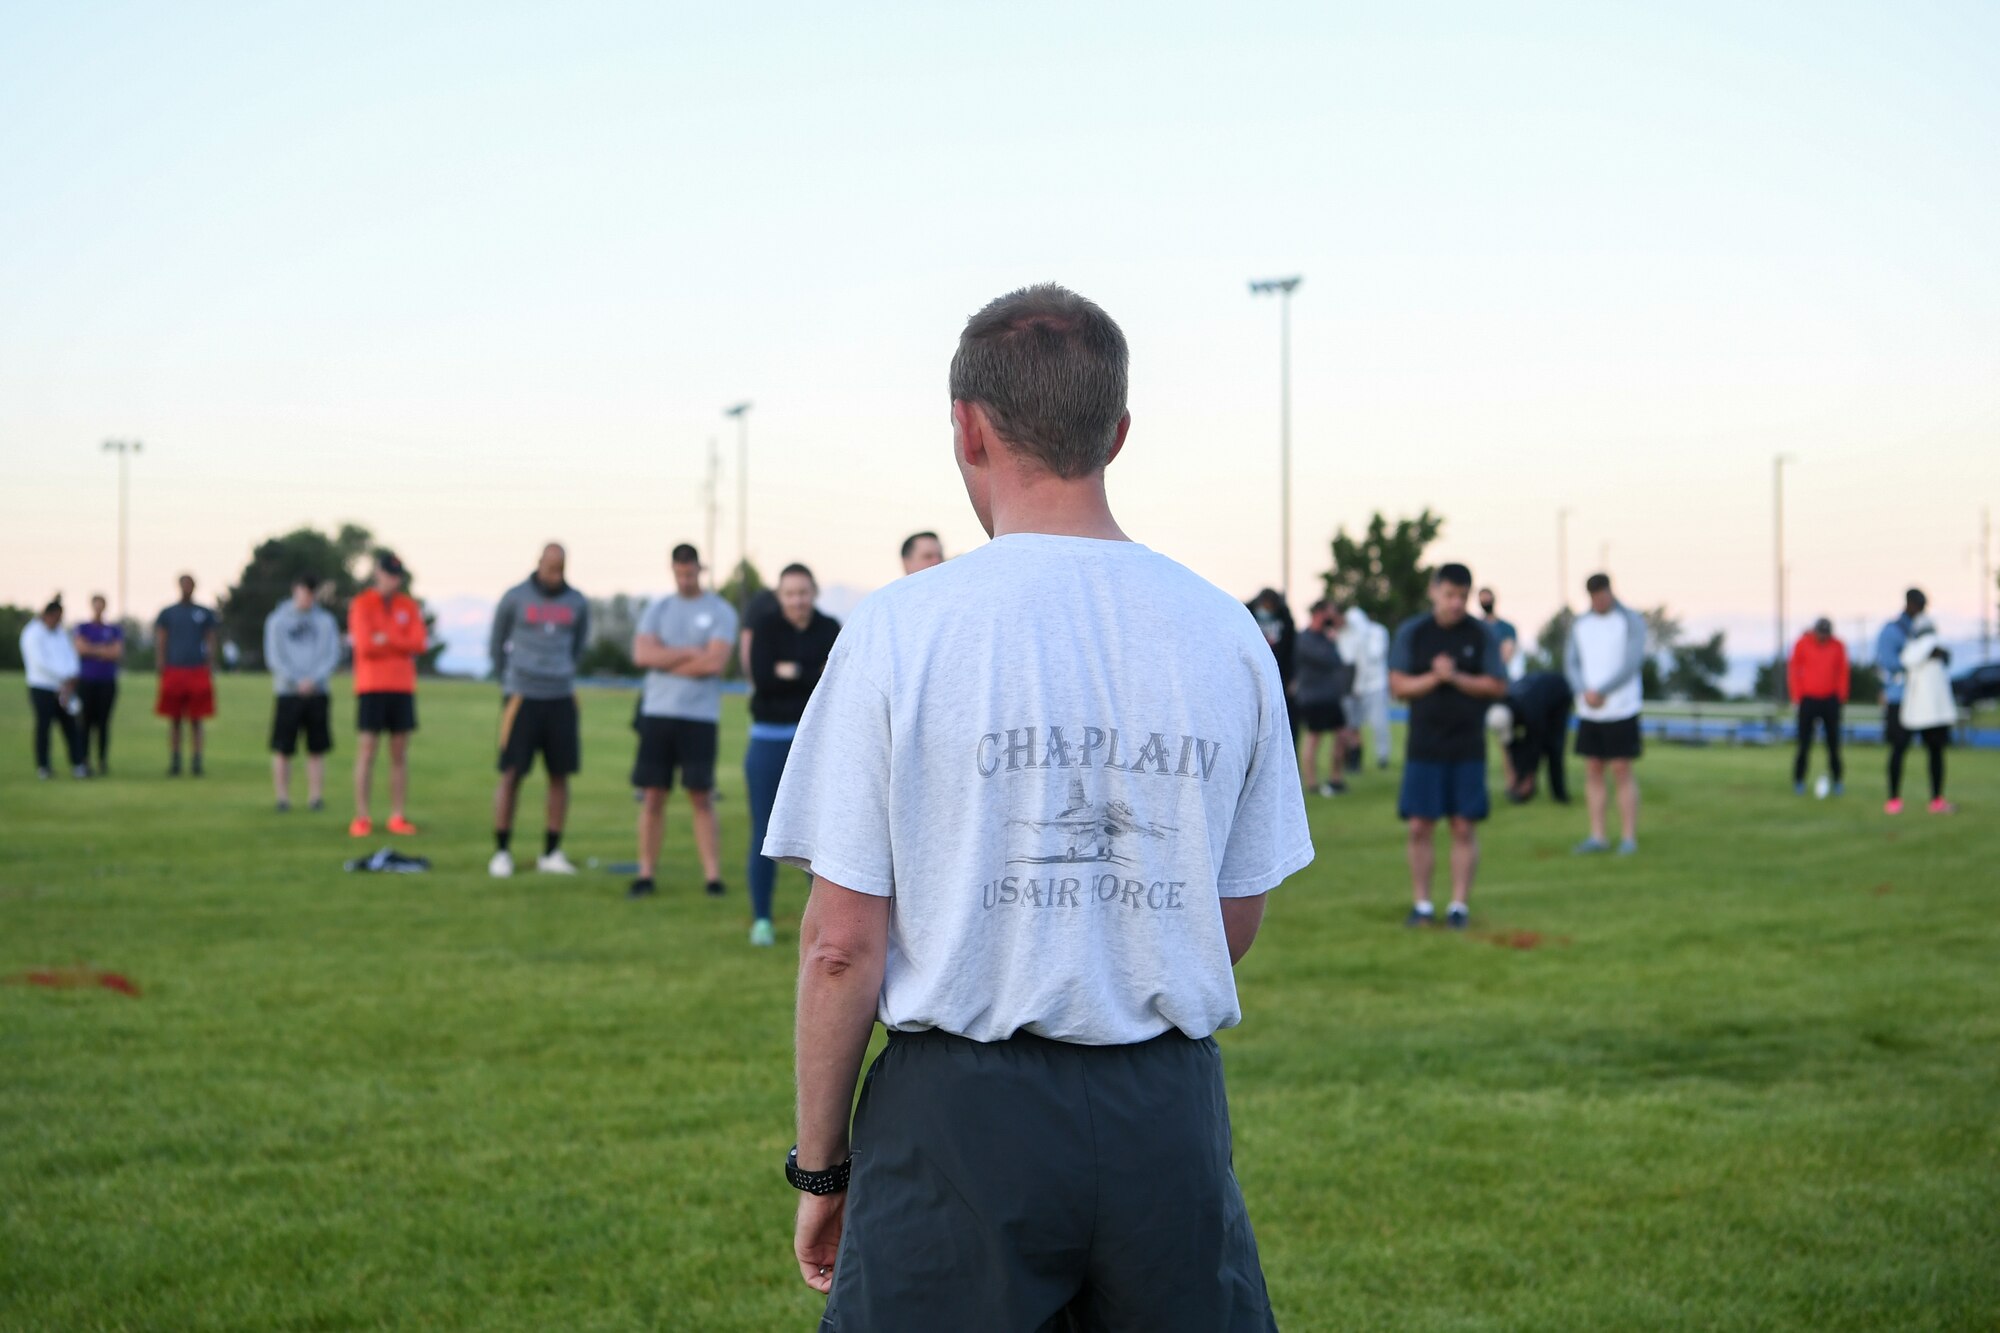 Chaplain (Capt.) Jeffery Larsen, 75th Air Base Wing, gives an invocation before the Unity 5K run/walk.